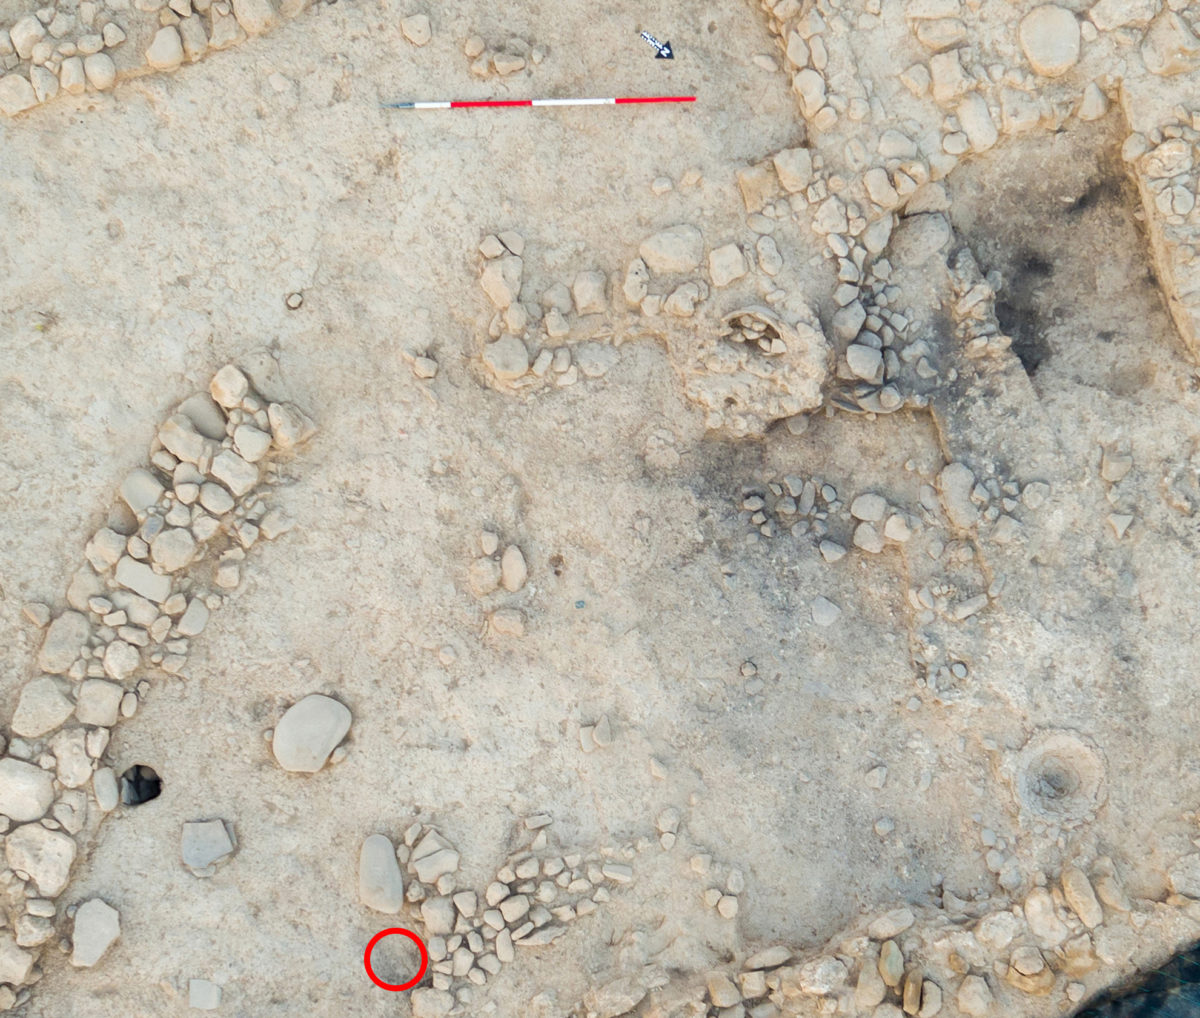 Figure 1: Area P/B2 showing location of ashy area (upper right) and ground stone installations and post hole (lower left). The position of Red Polished IV bowl (KS651) prior to removal is shown in the red circle.